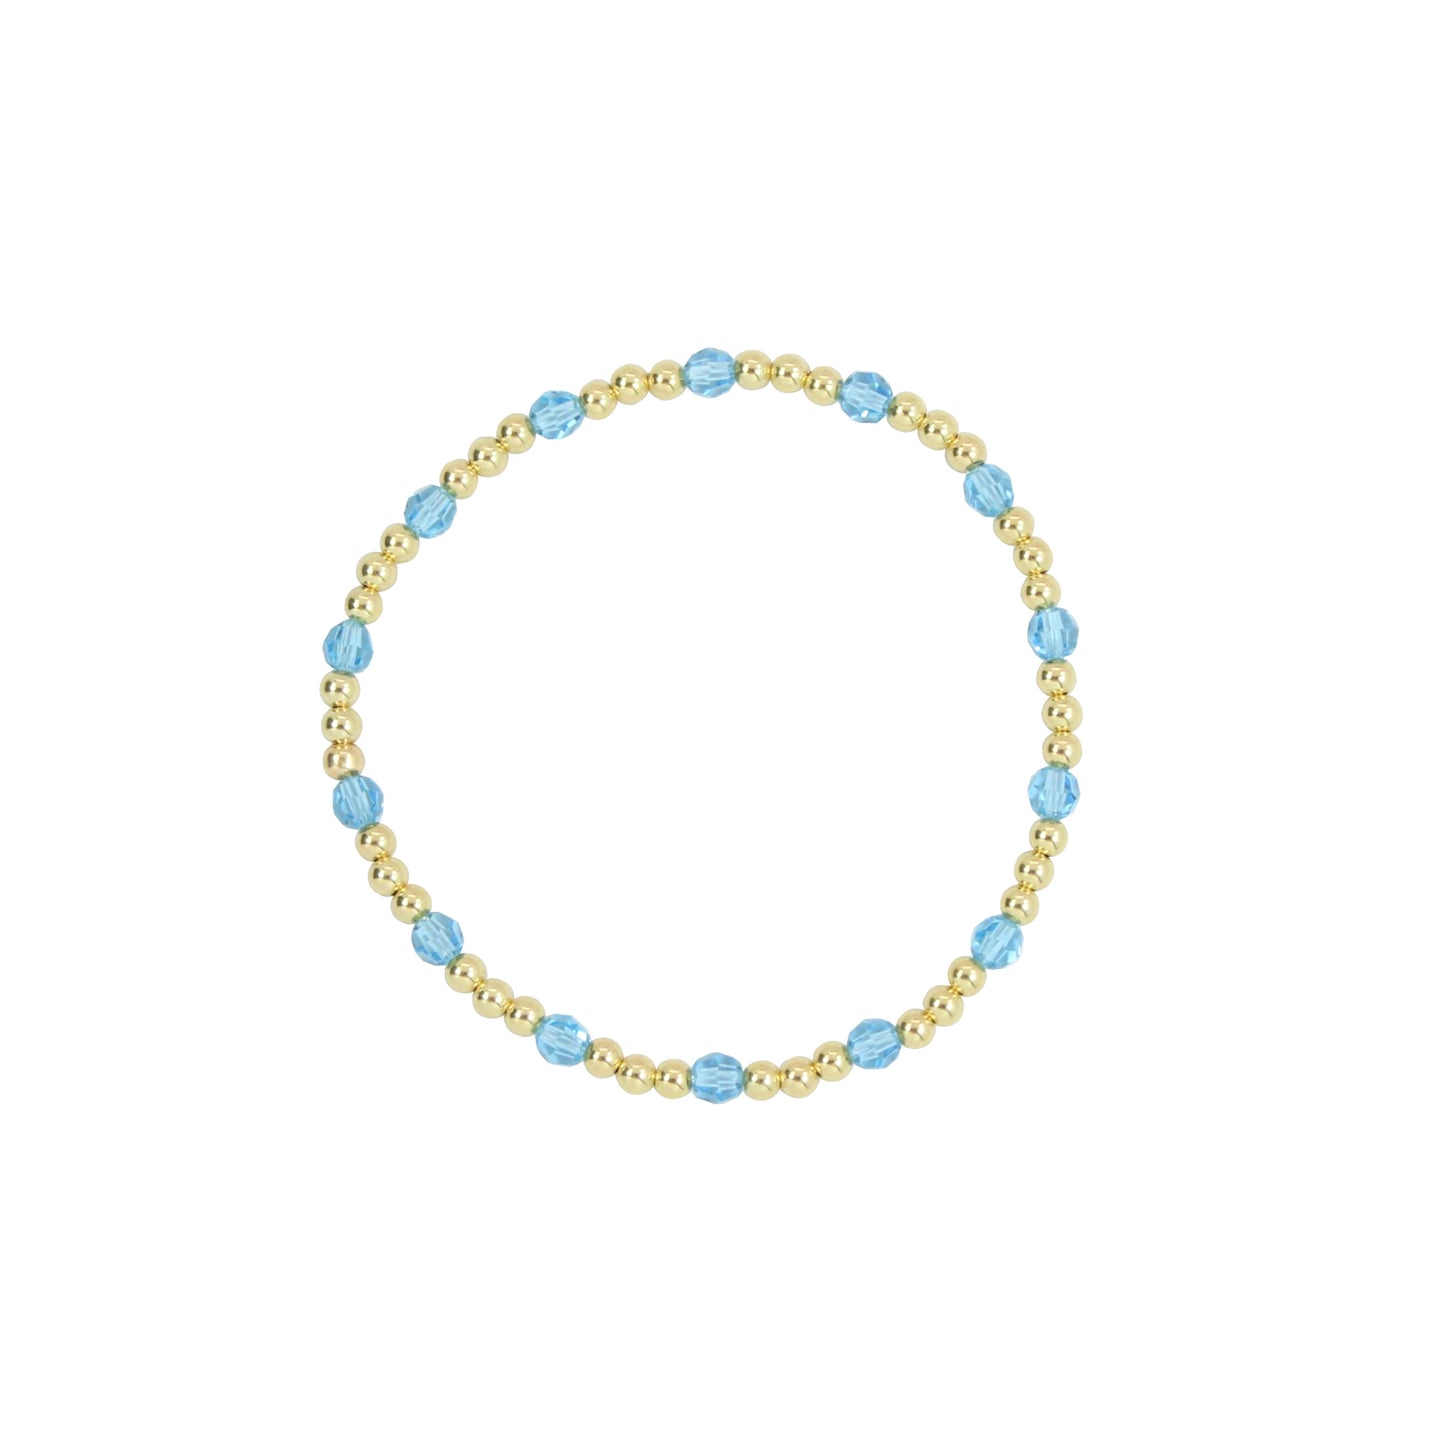 Stretchy March Birthstone Adult Dotted Bracelet (3MM + 4MM beads)